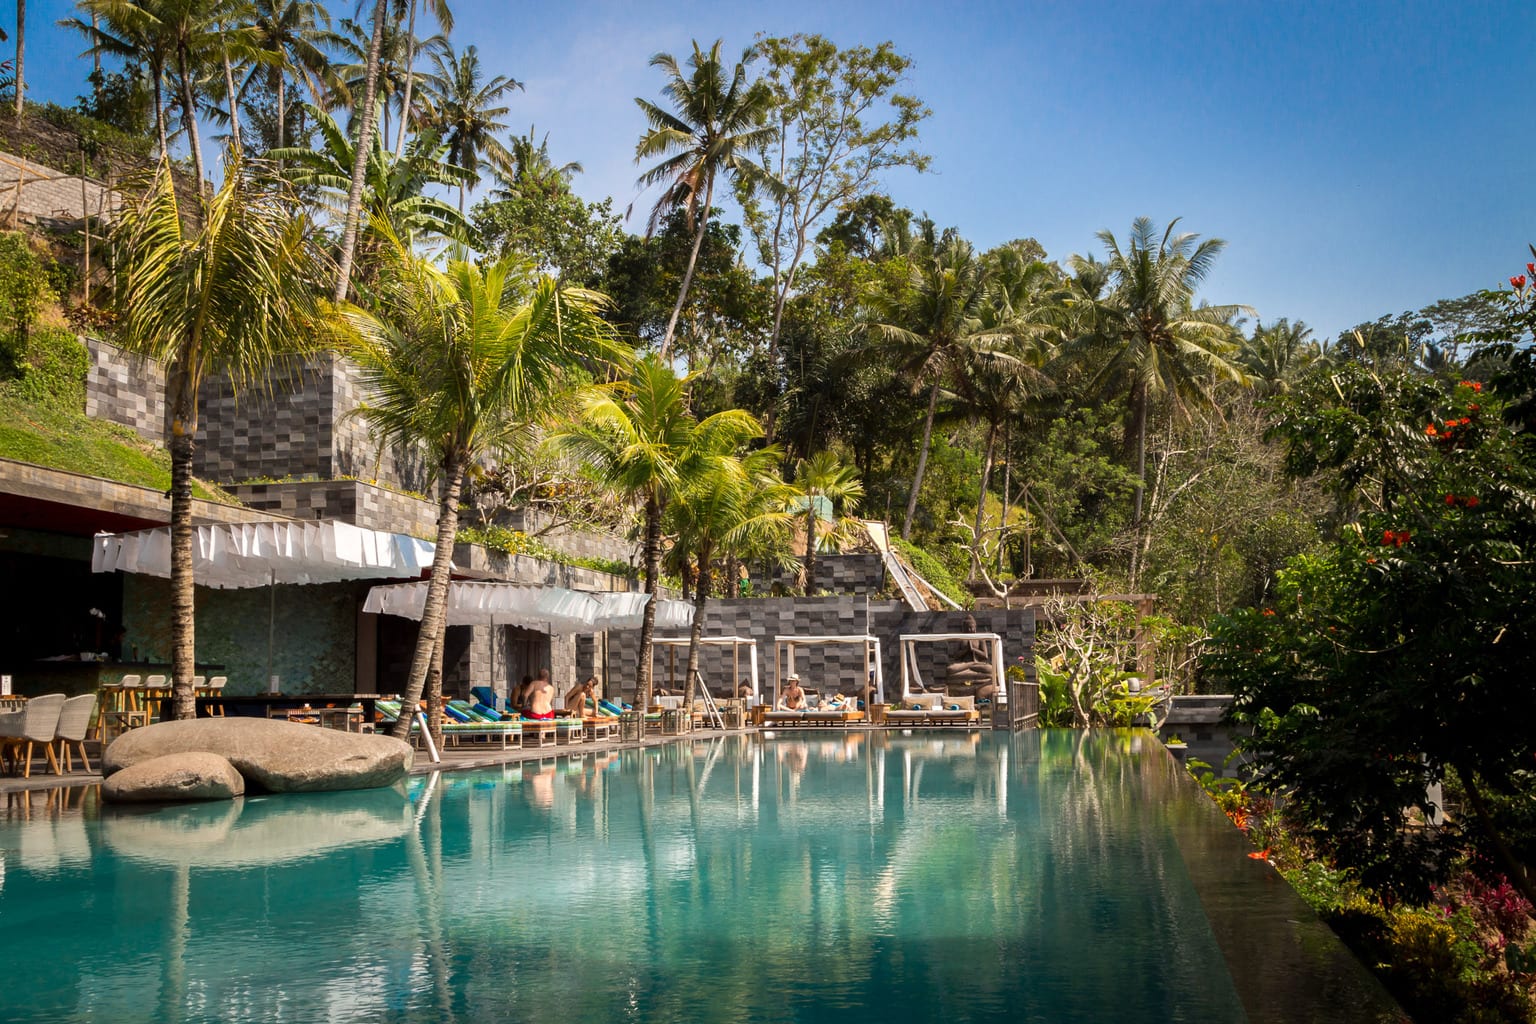 Where to stay in Bali - The ultimate hotel & resorts guide